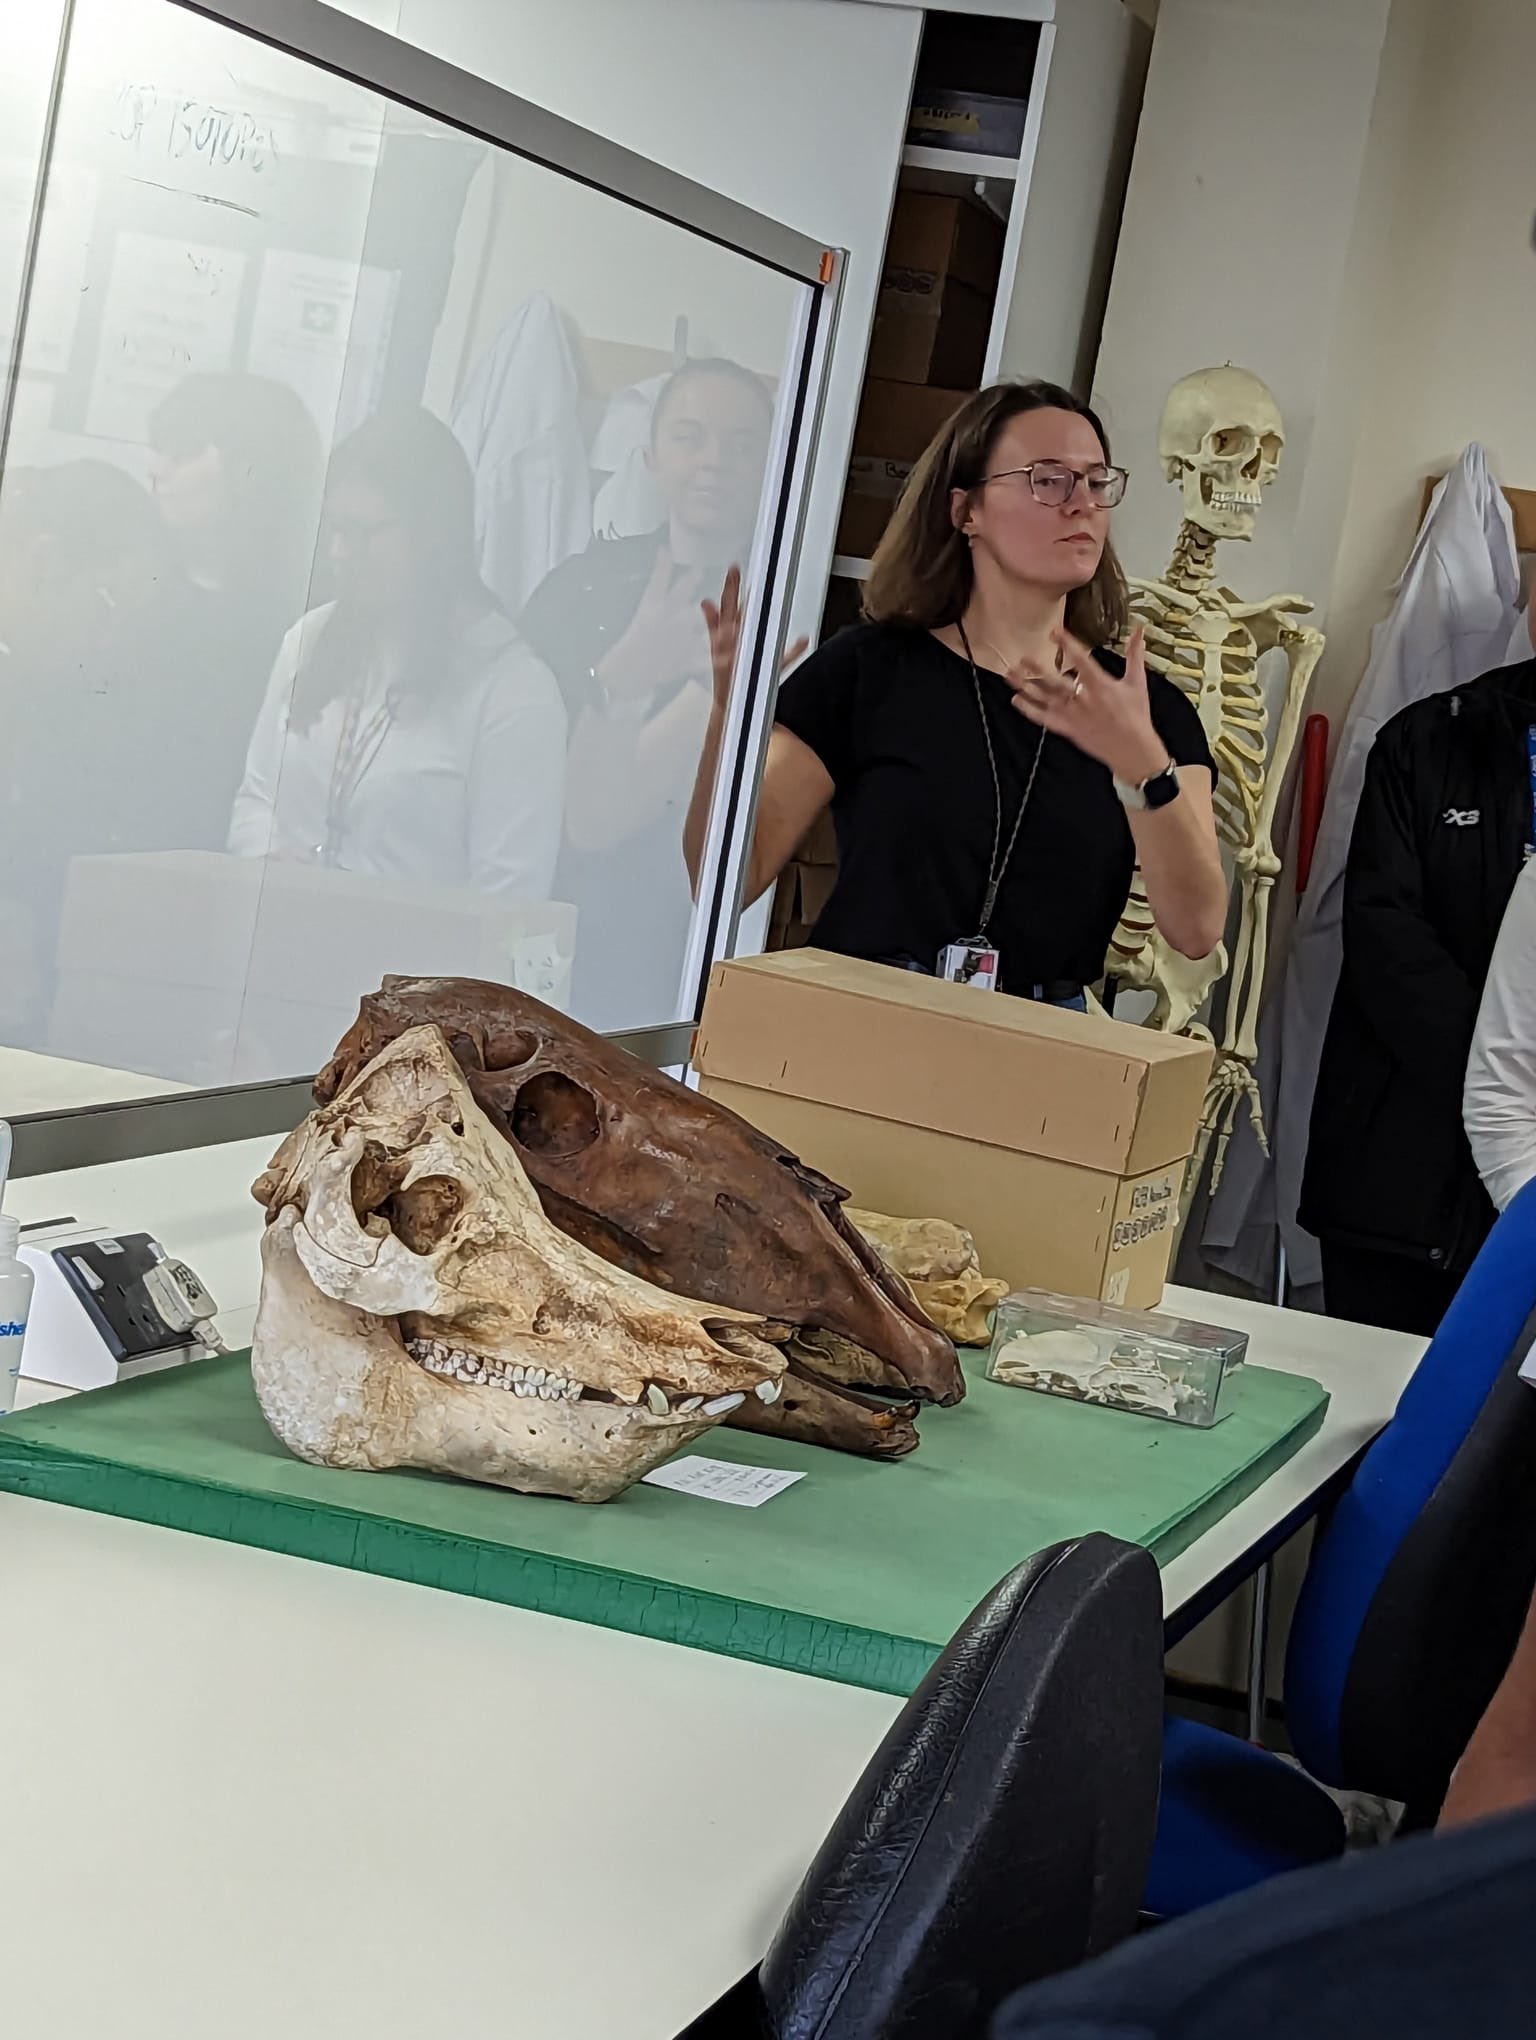 A woman speaks to a group by a desk. On the desk are a variety of animal skulls including a pig and horse.